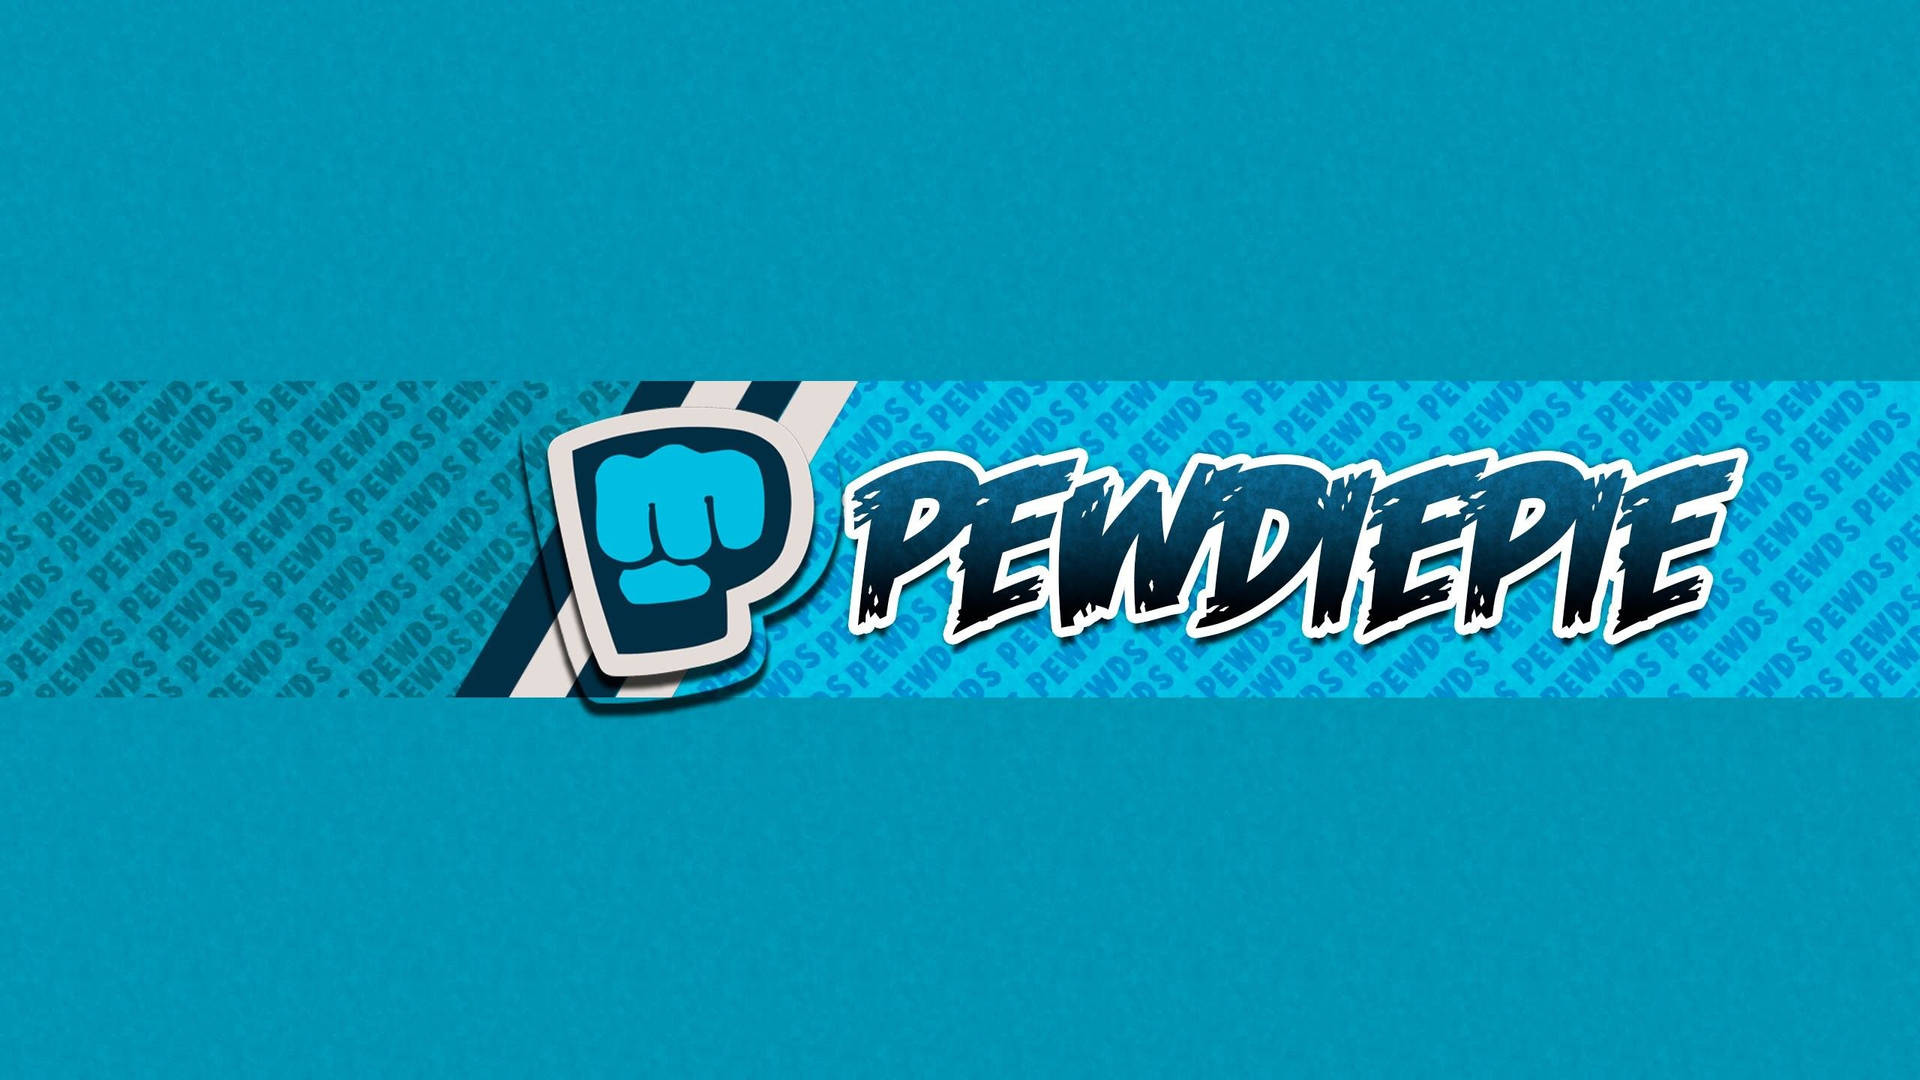 Pewdiepie - Spread The Love With The Classic Brofist Background